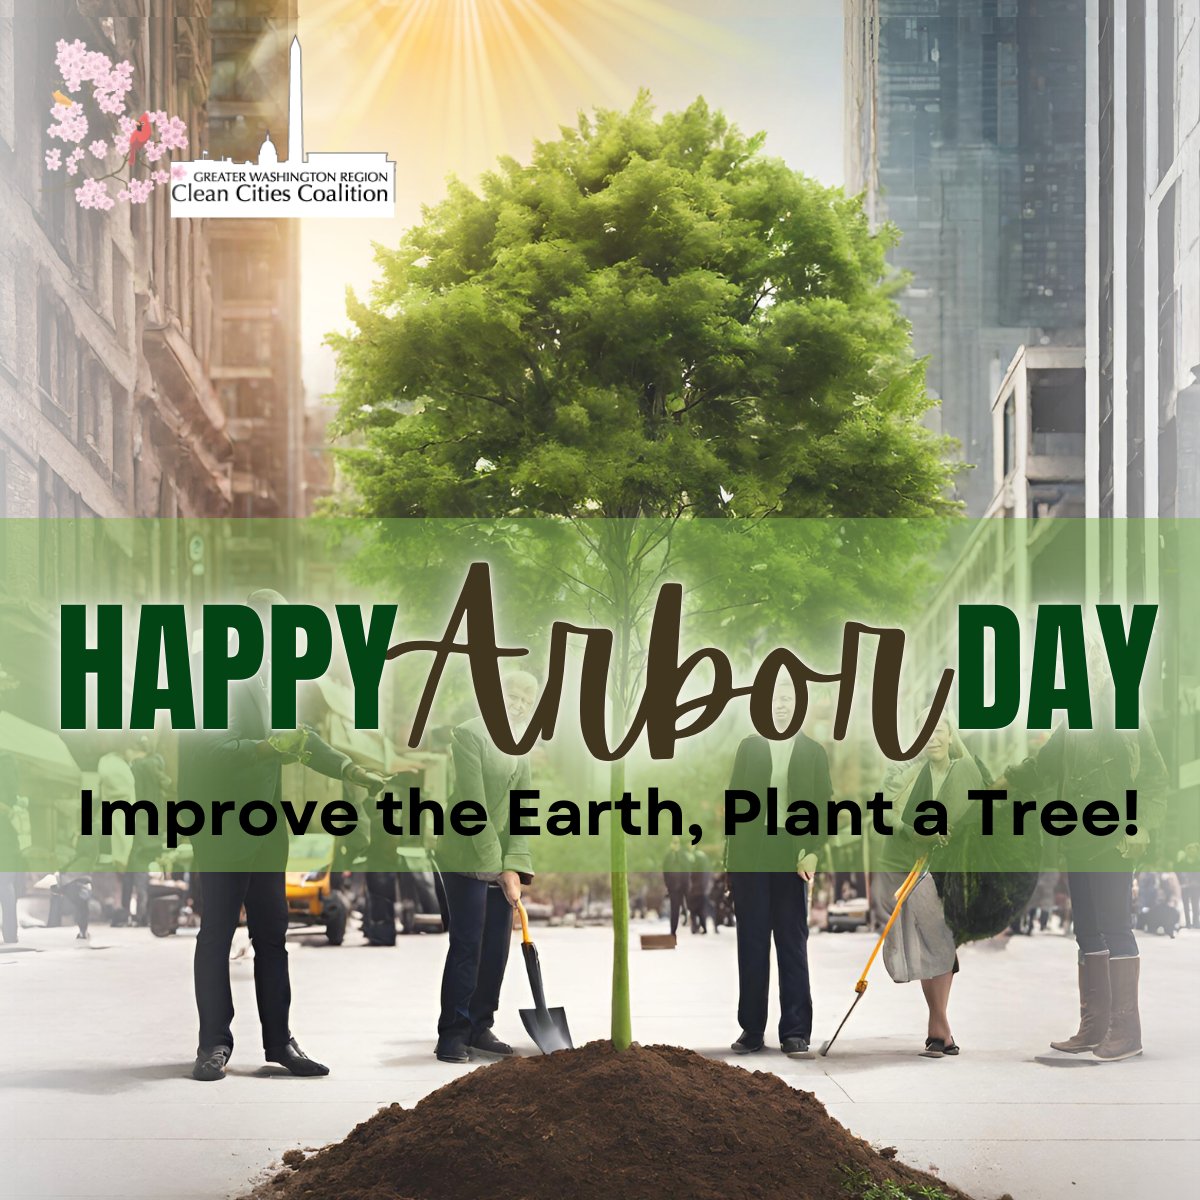 Happy Arbor Day!

#CleanAir #CleanTransportation #CleanEnergy #ArborDay